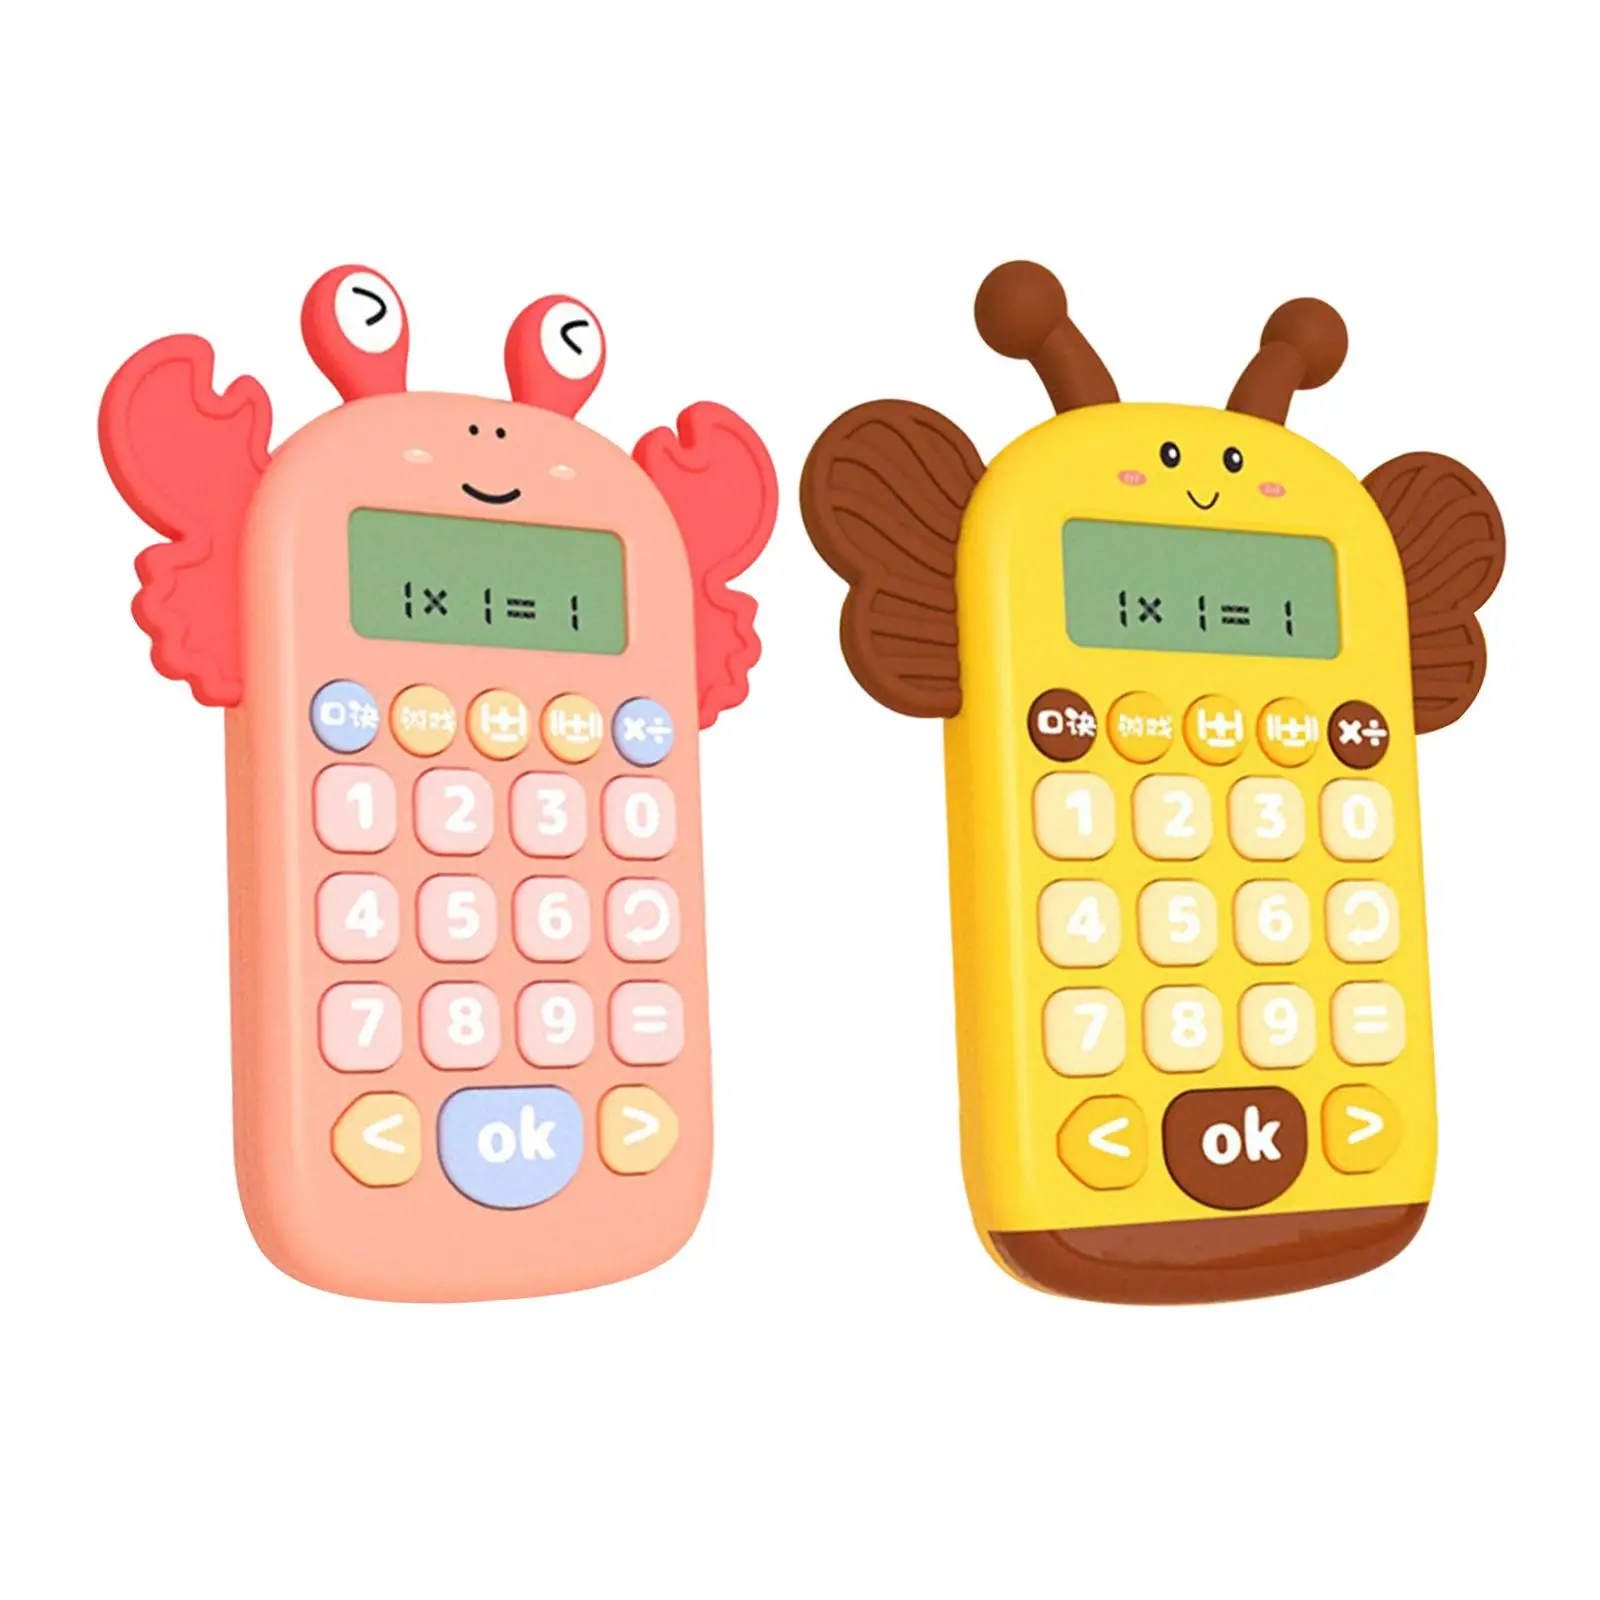 Portable Math Calculators Early Math Addition Subtraction Multiplication Division for Classroom, Student, School, Students Gifts